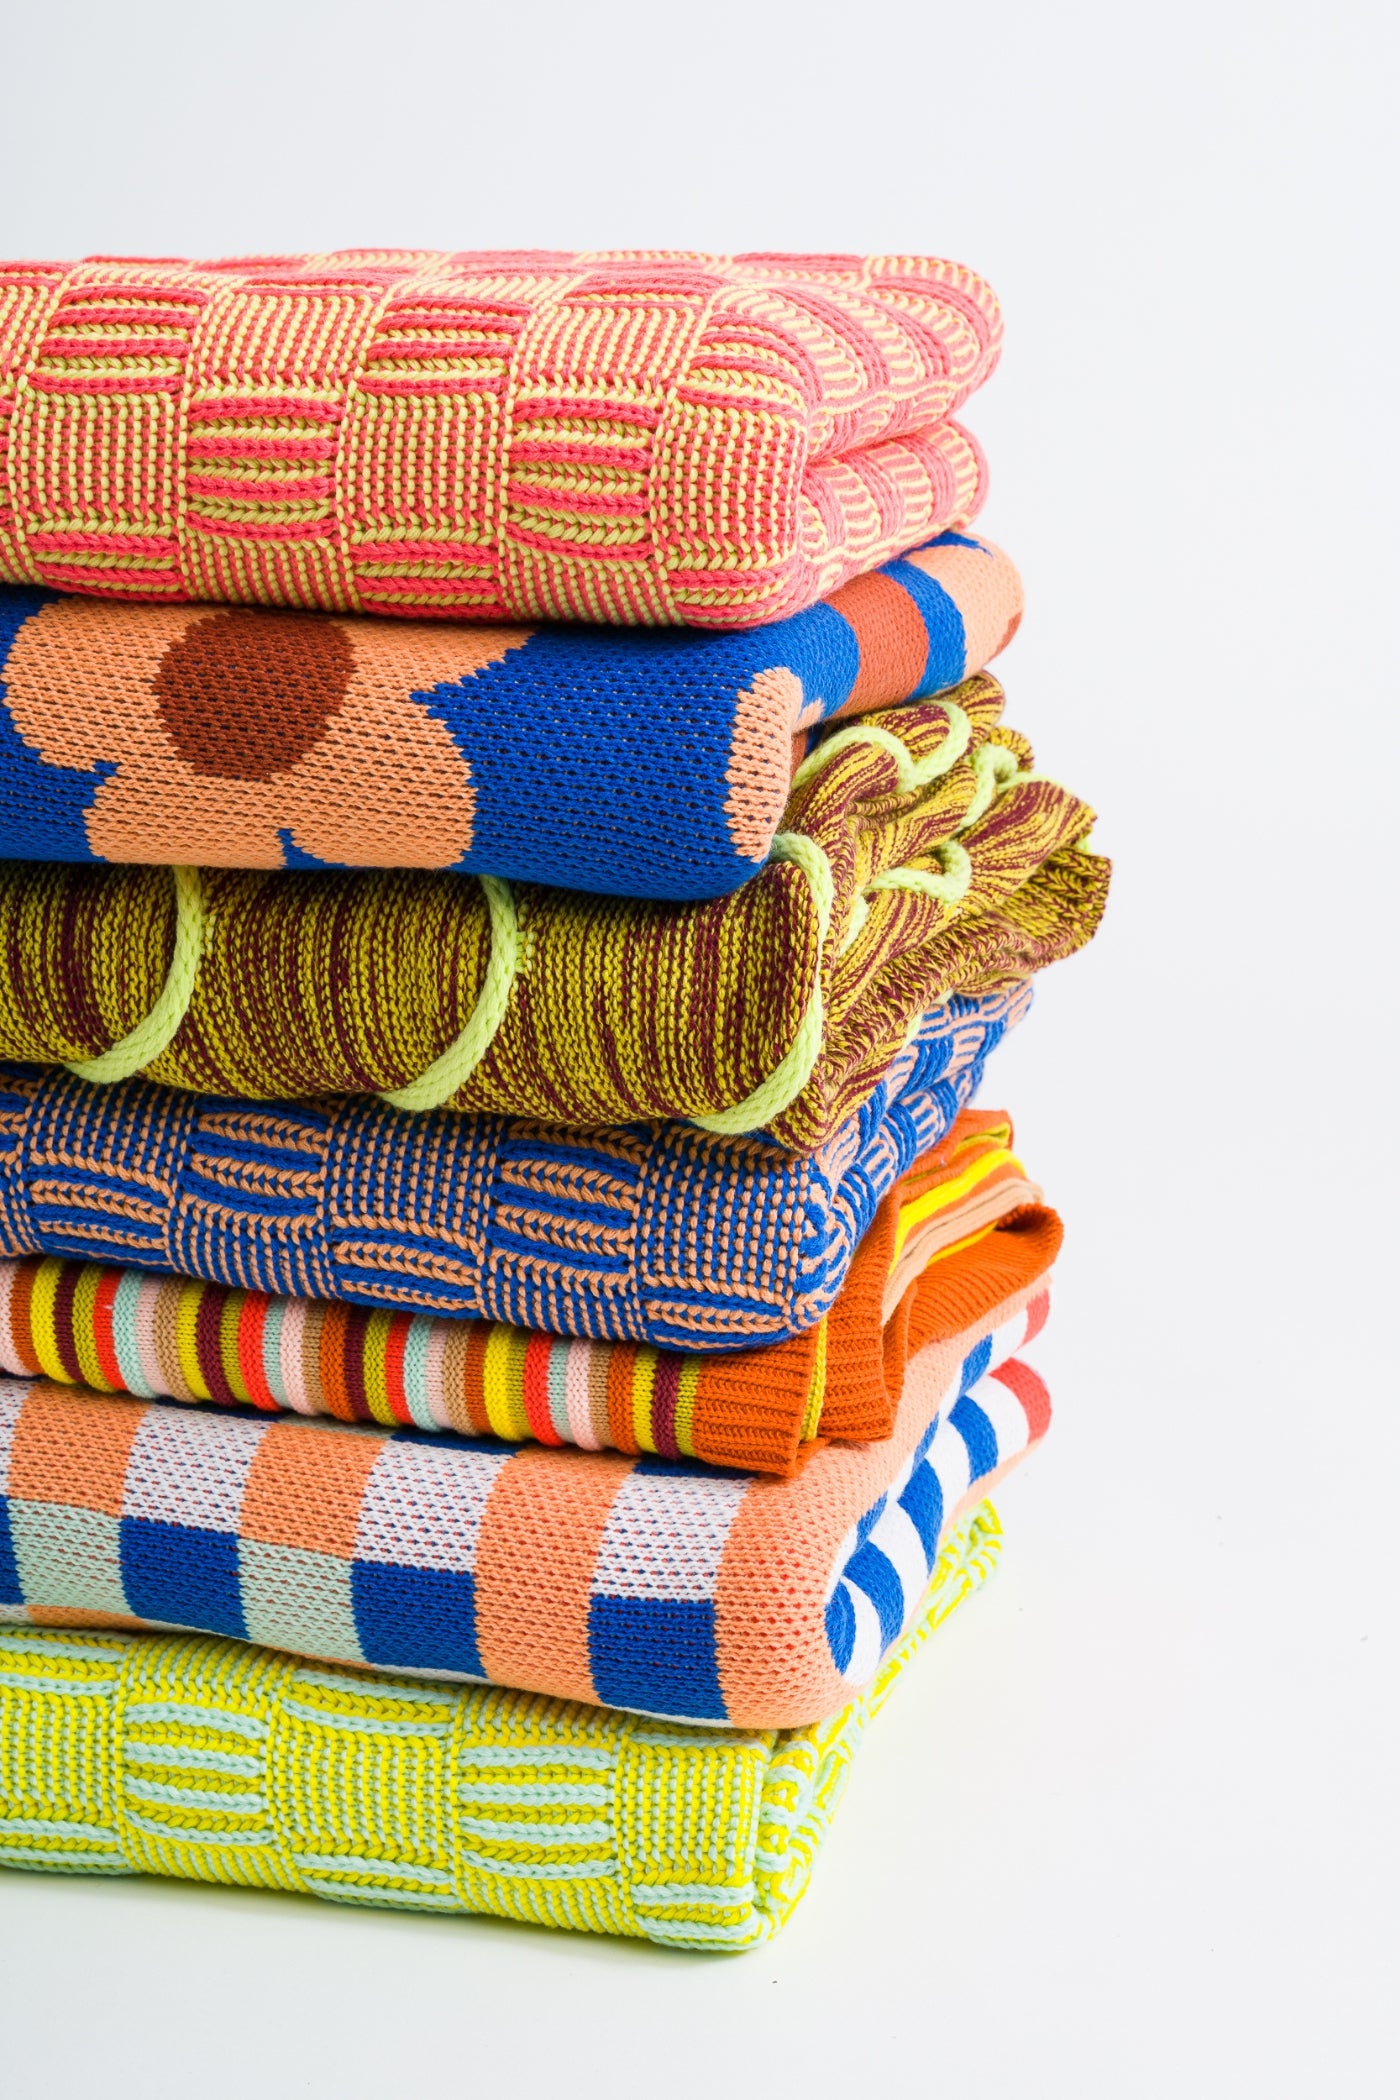 stack of colorful textured knit throw blankets